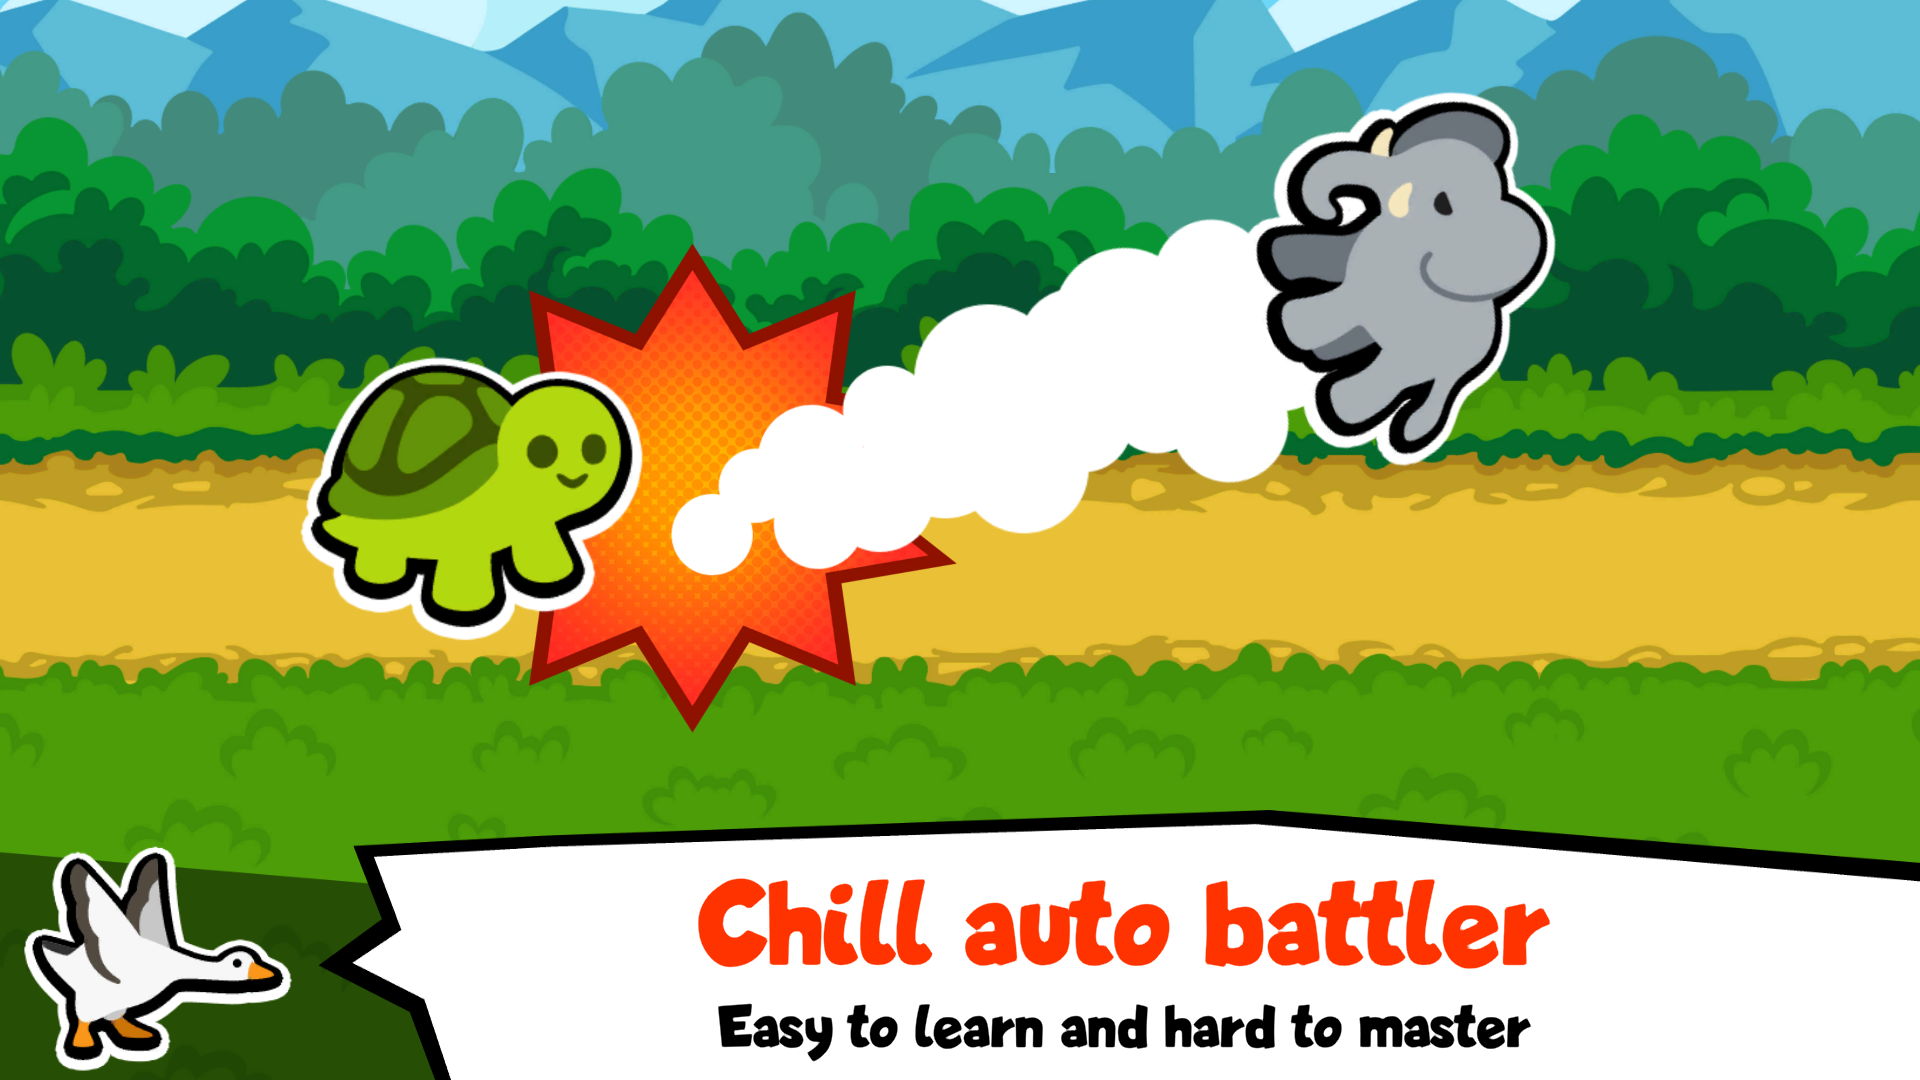 Chill auto battler - Easy to learn and hard to master